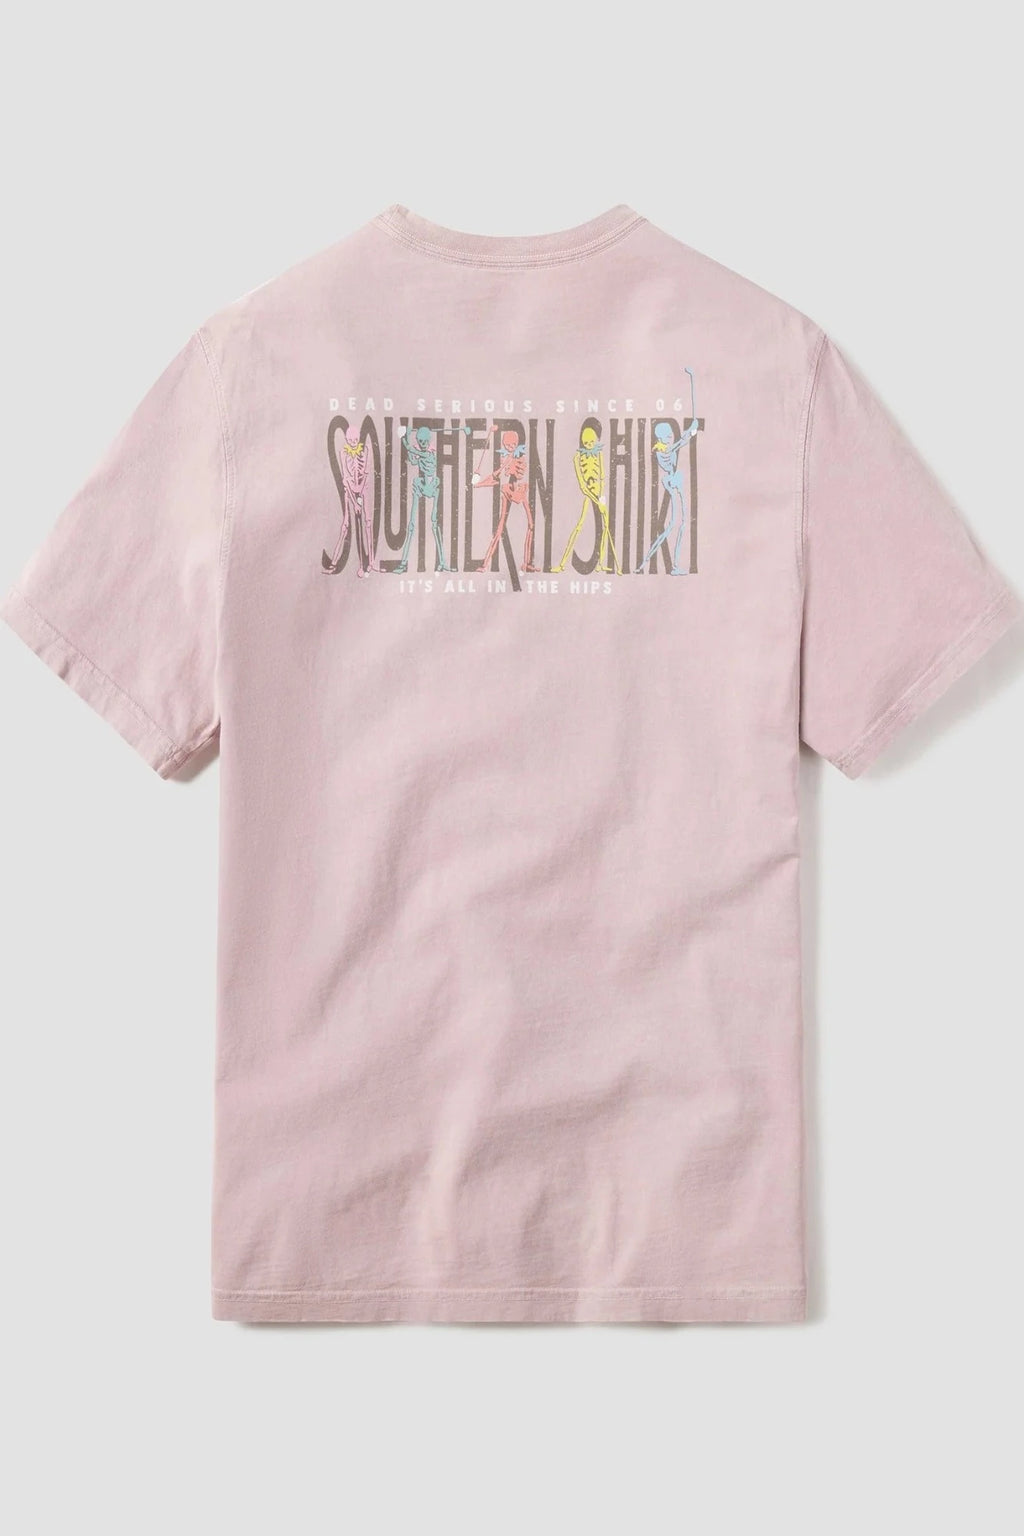 Amateaur Hour SS Graphic Tee